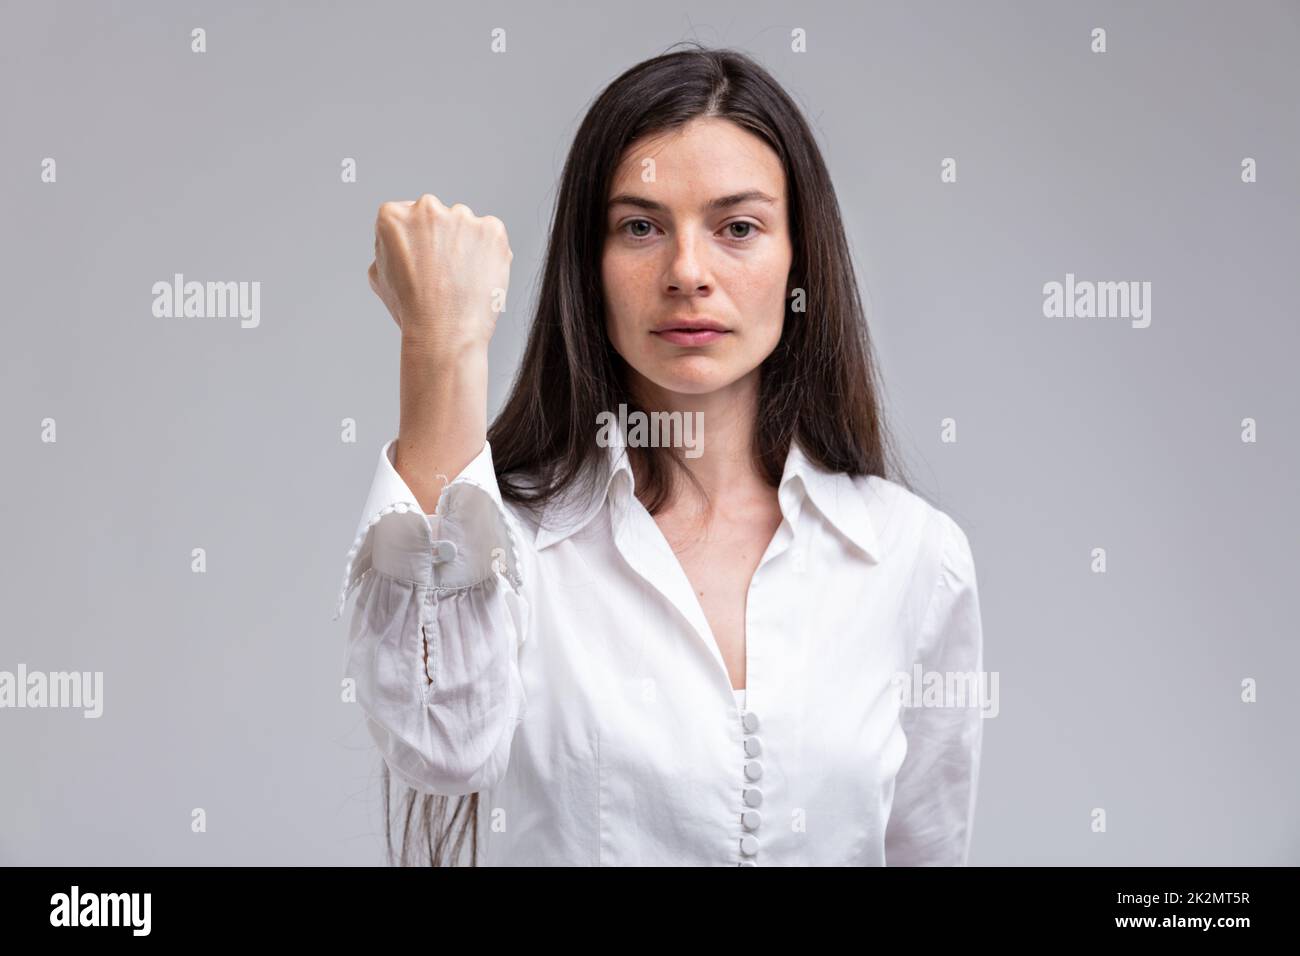 focus on the FIST of a stern woman Stock Photo